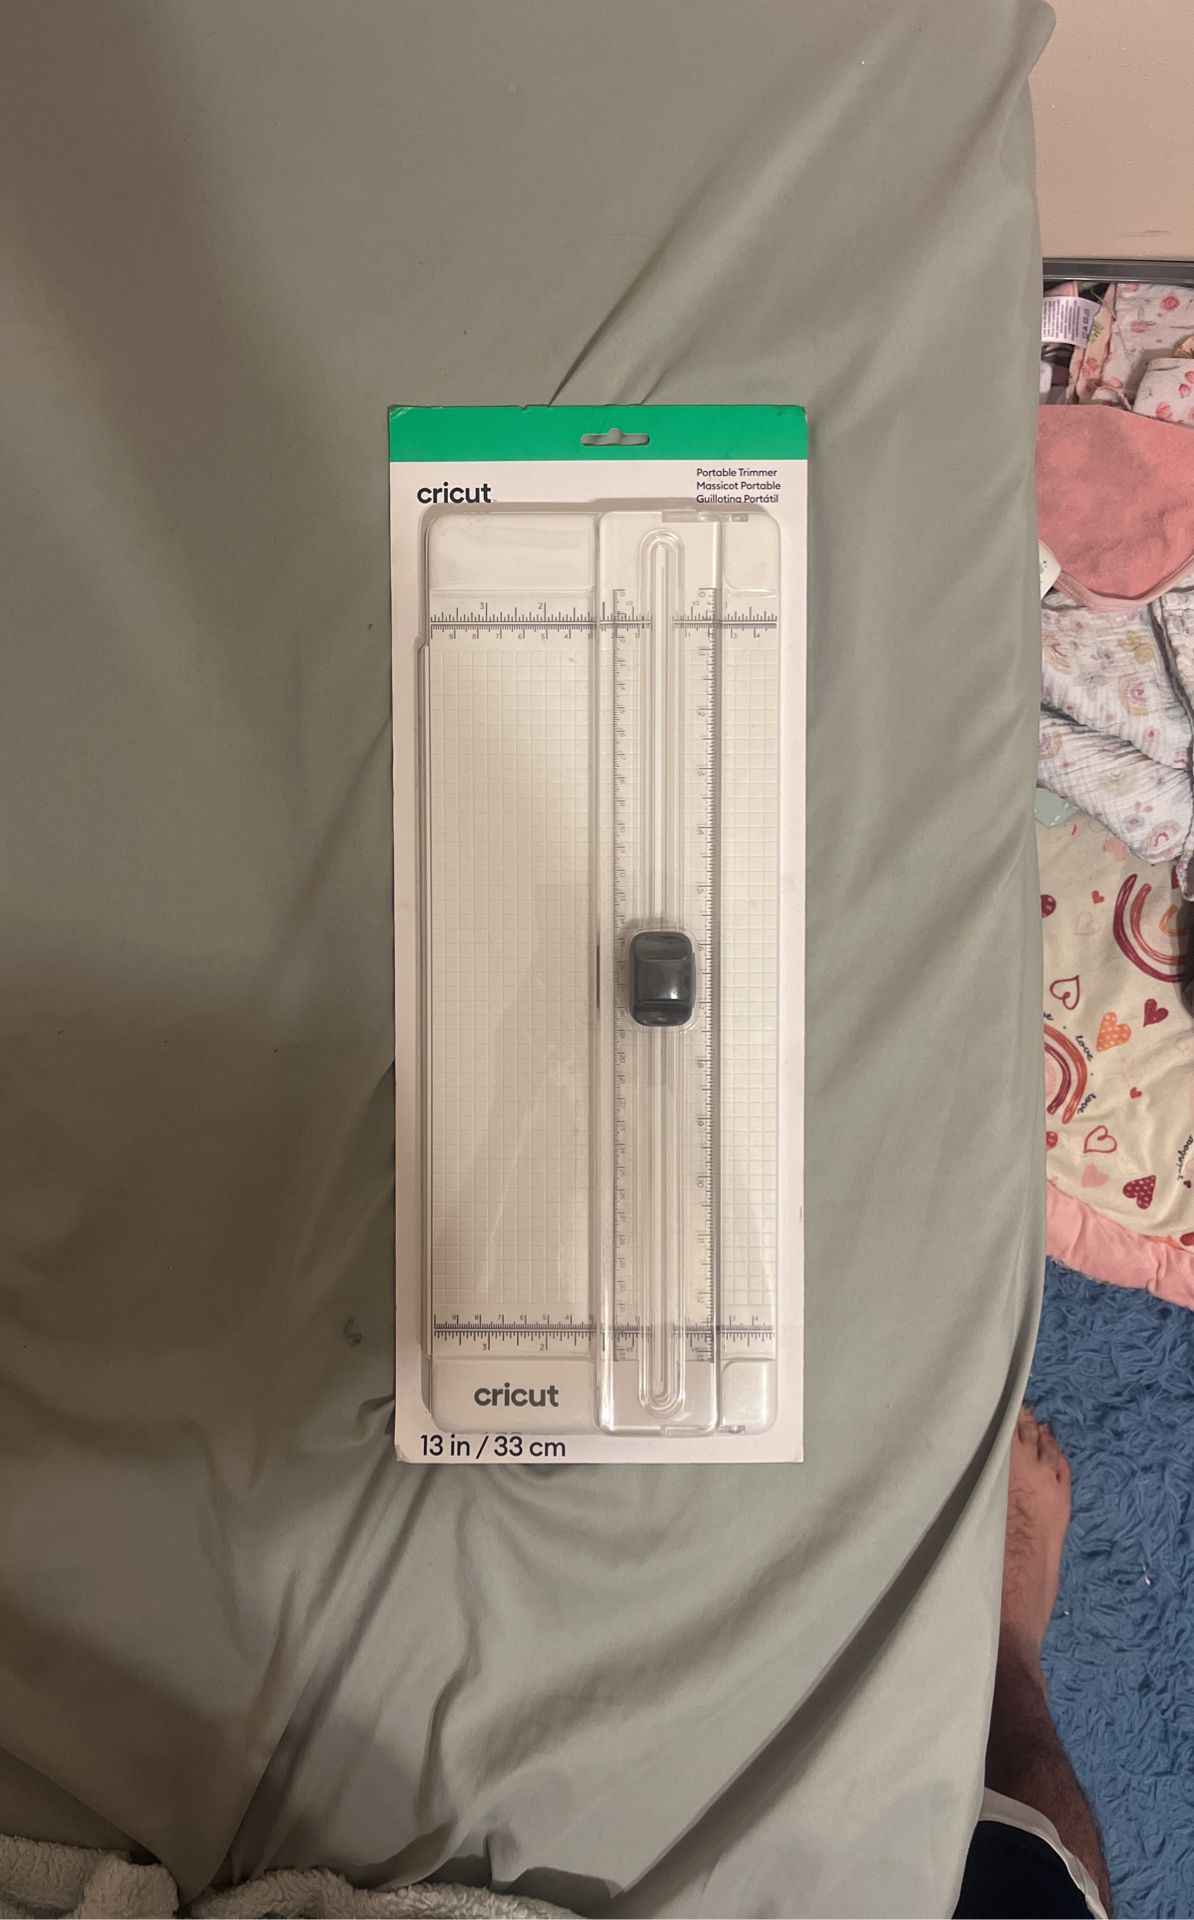 Cricut Portable Trimmer for Sale in Easley, SC - OfferUp